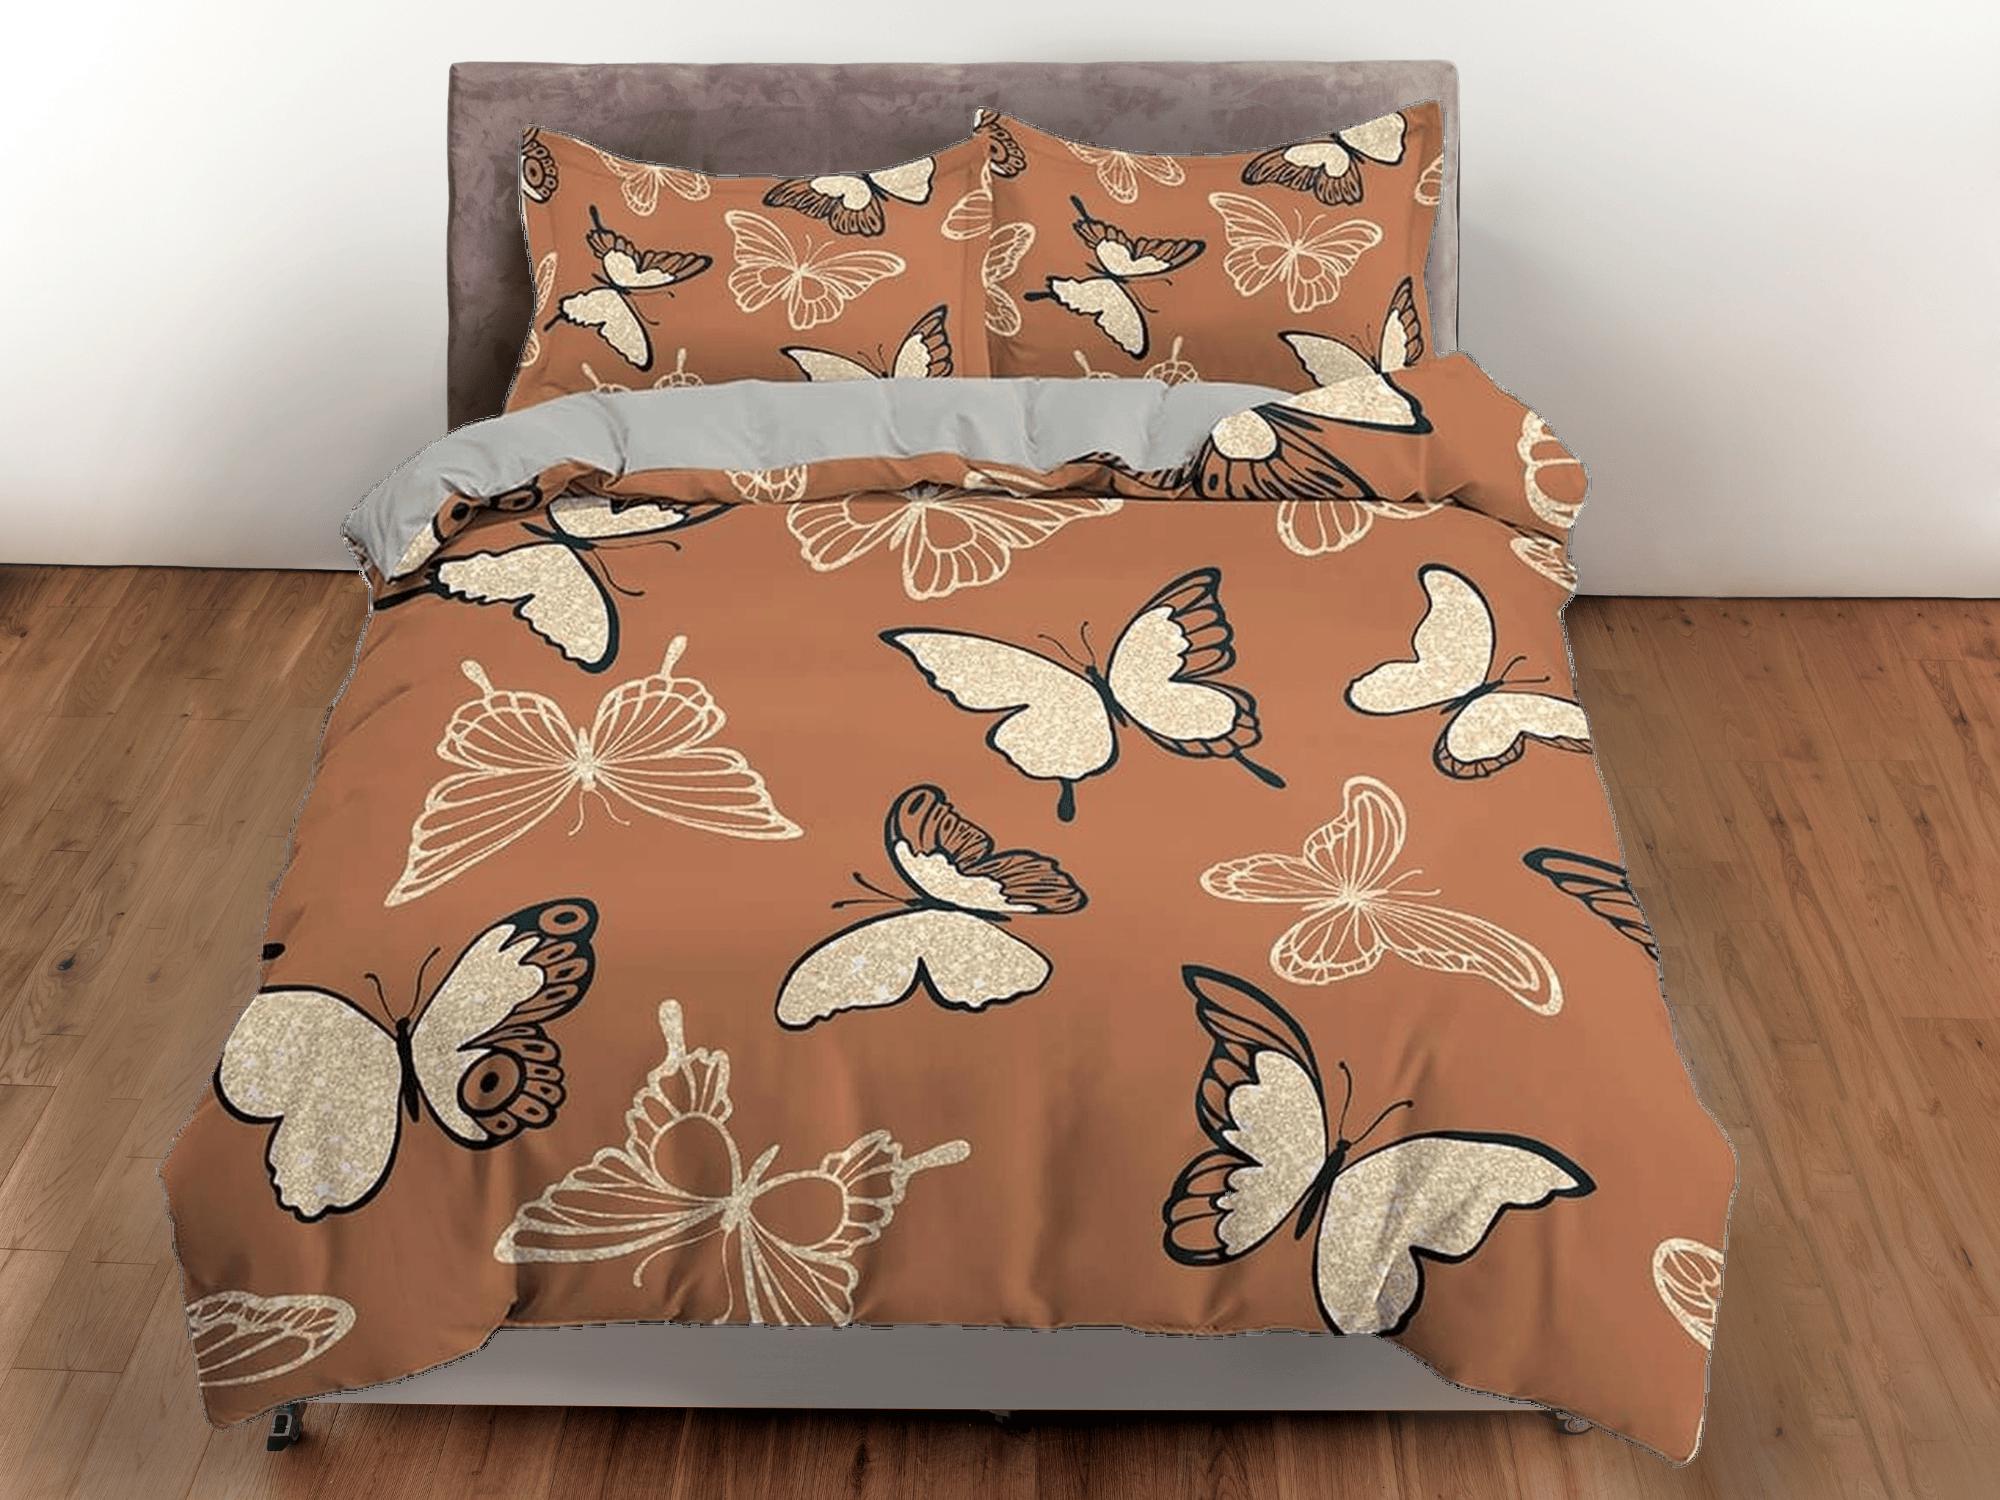 daintyduvet Retro butterfly bedding brown duvet cover colorful dorm bedding, full size adult duvet king queen twin, butterfly nursery toddler bedding